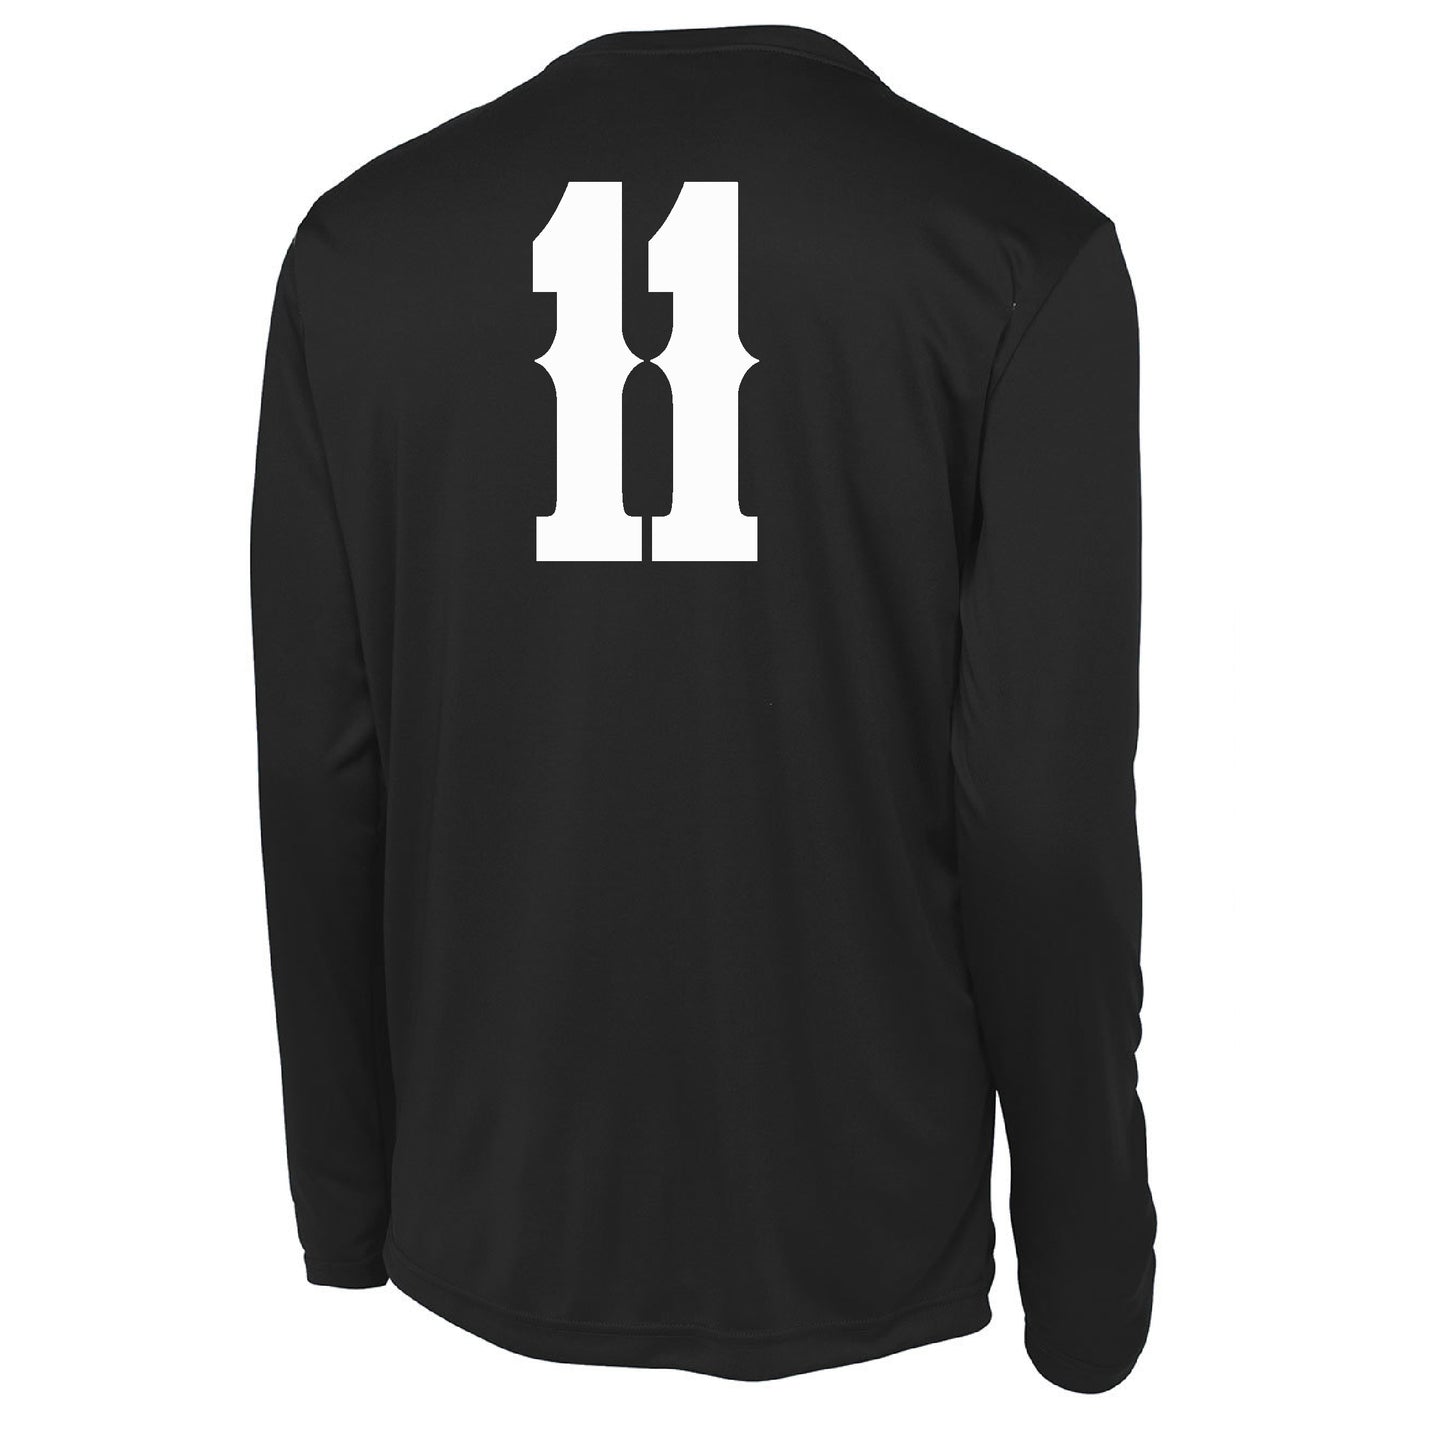 Workout Tee Long Sleeve W/ Number